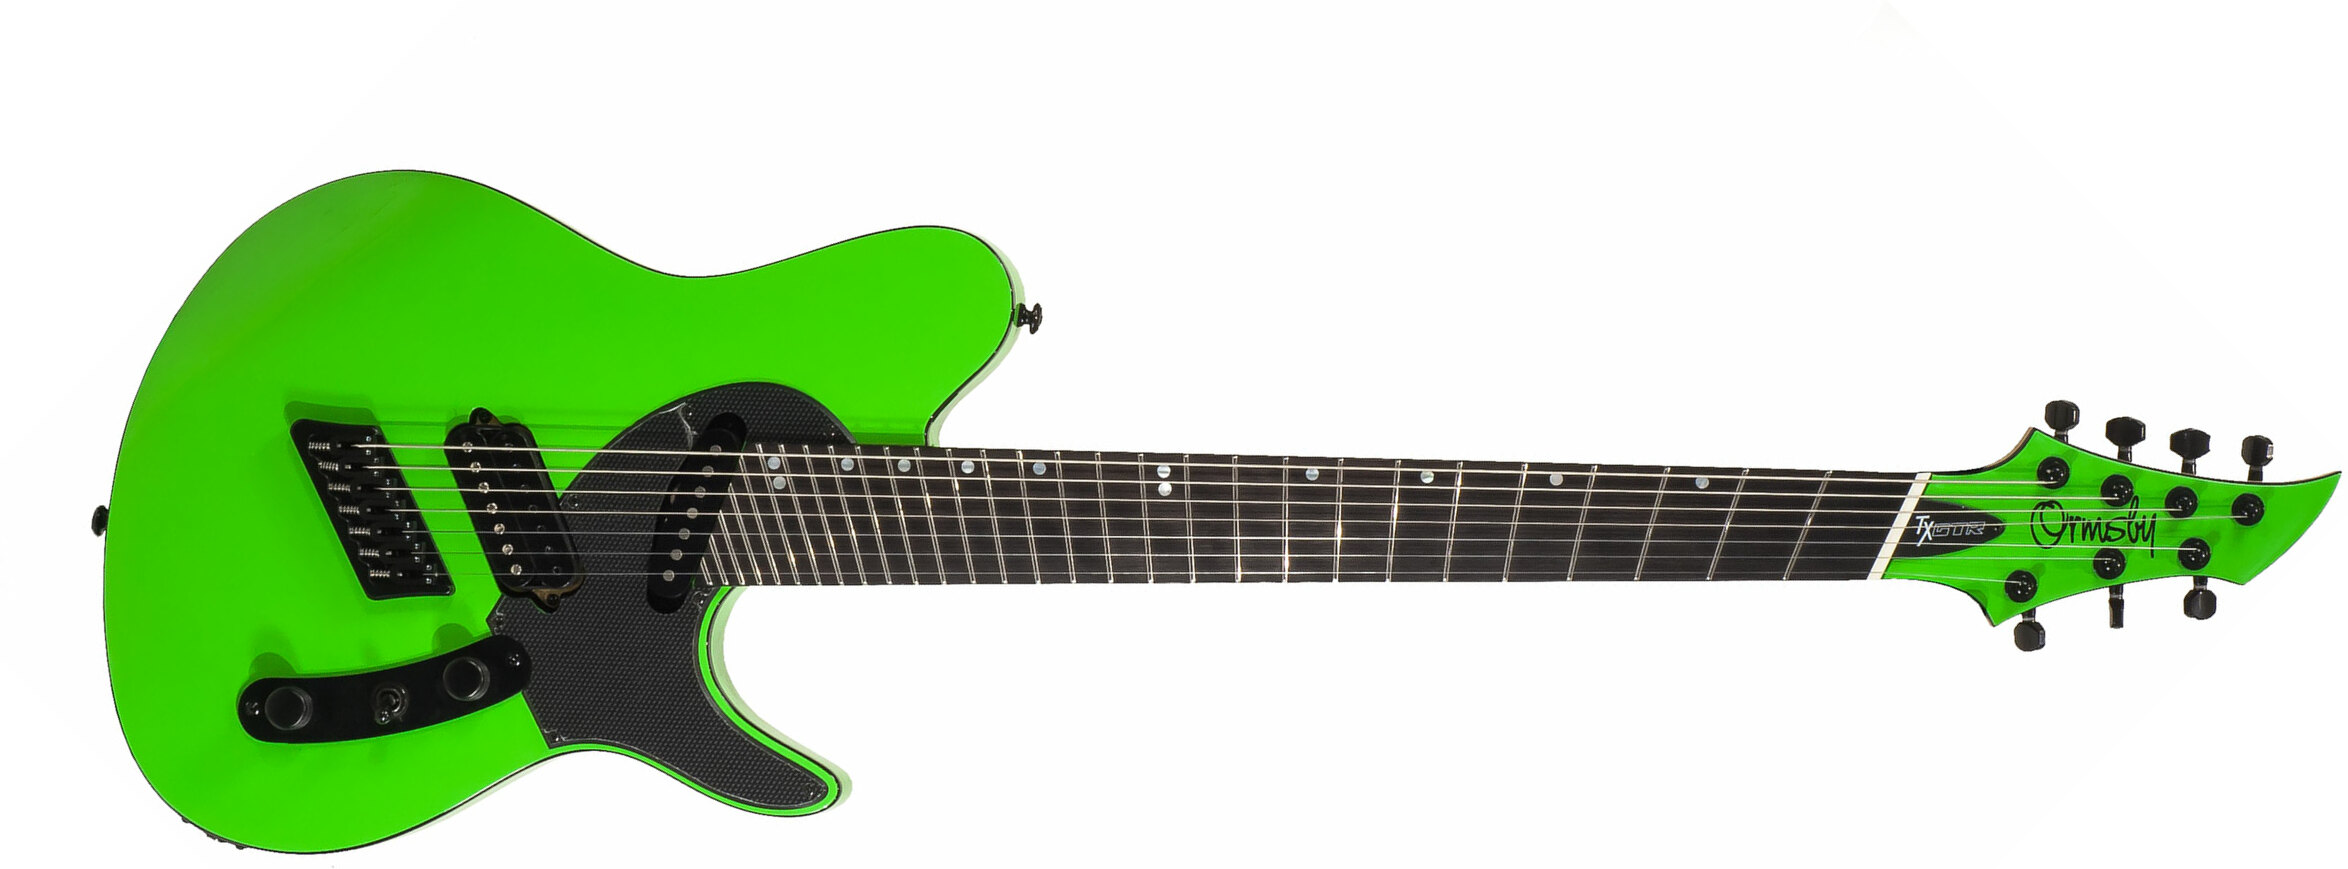 Ormsby Tx Gtr 7 Hs Ht Eb - Chernobyl Green - Guitare Électrique Multi-scale - Main picture